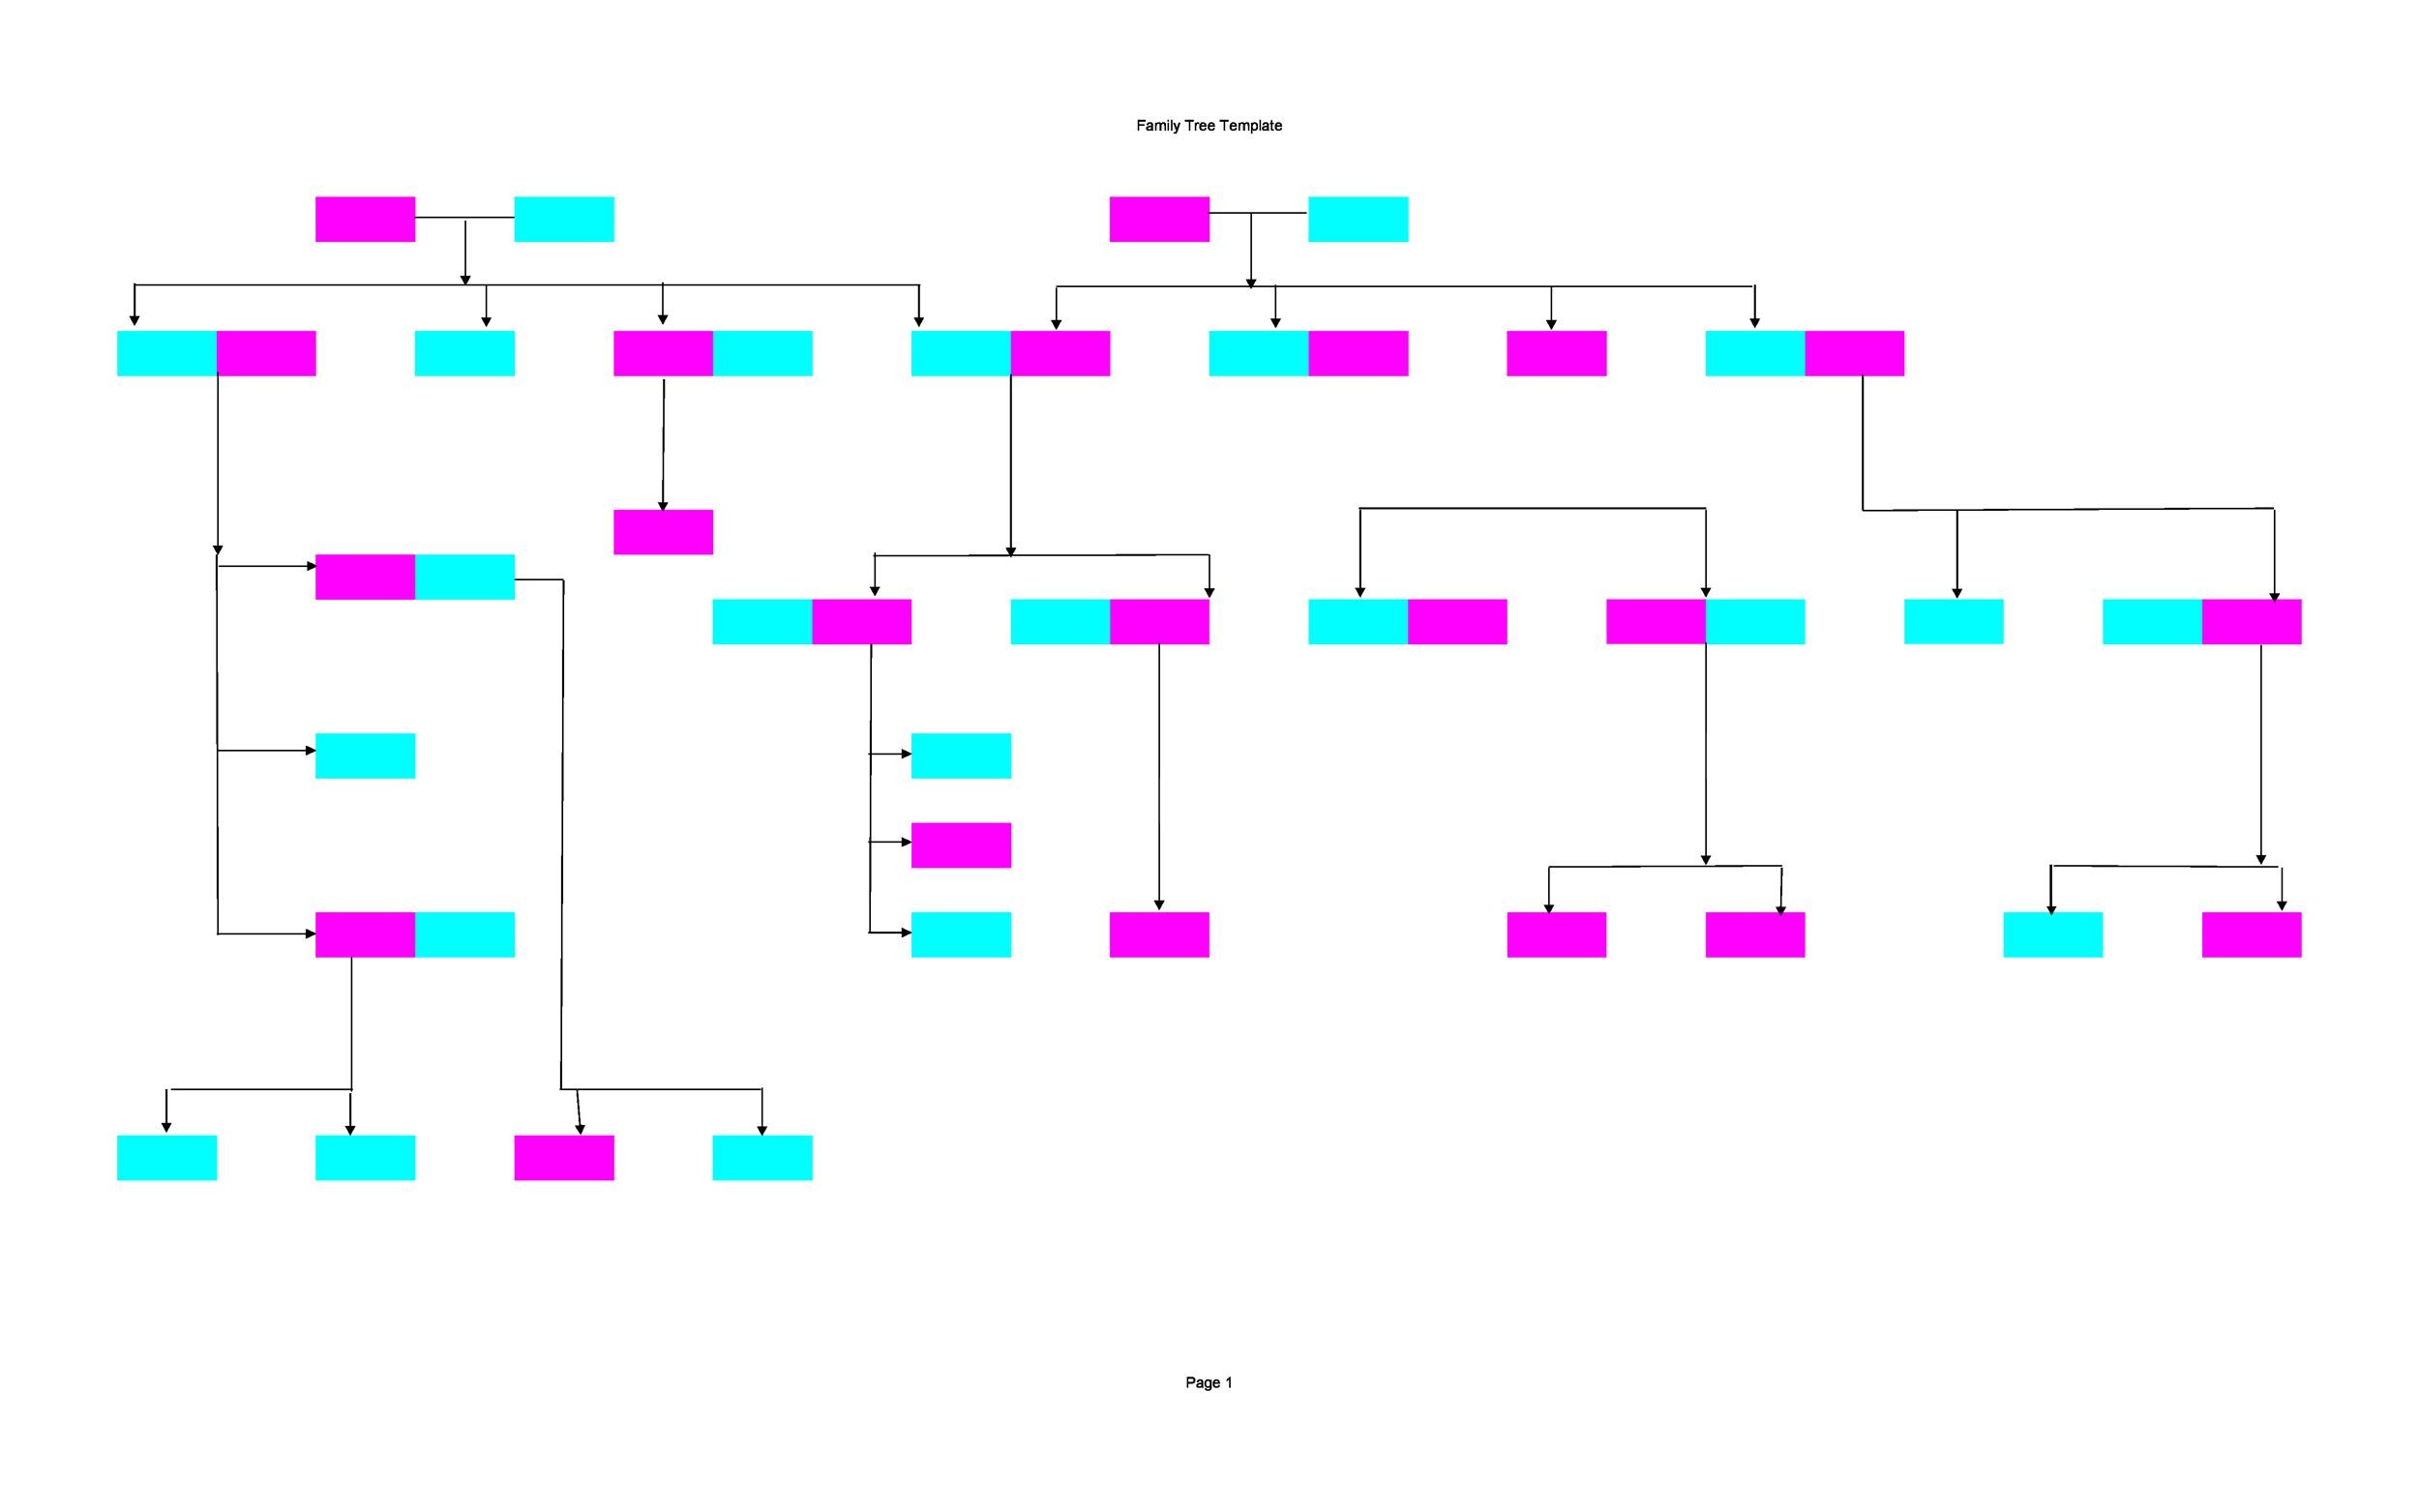 Family Tree Document Template from templatelab.com